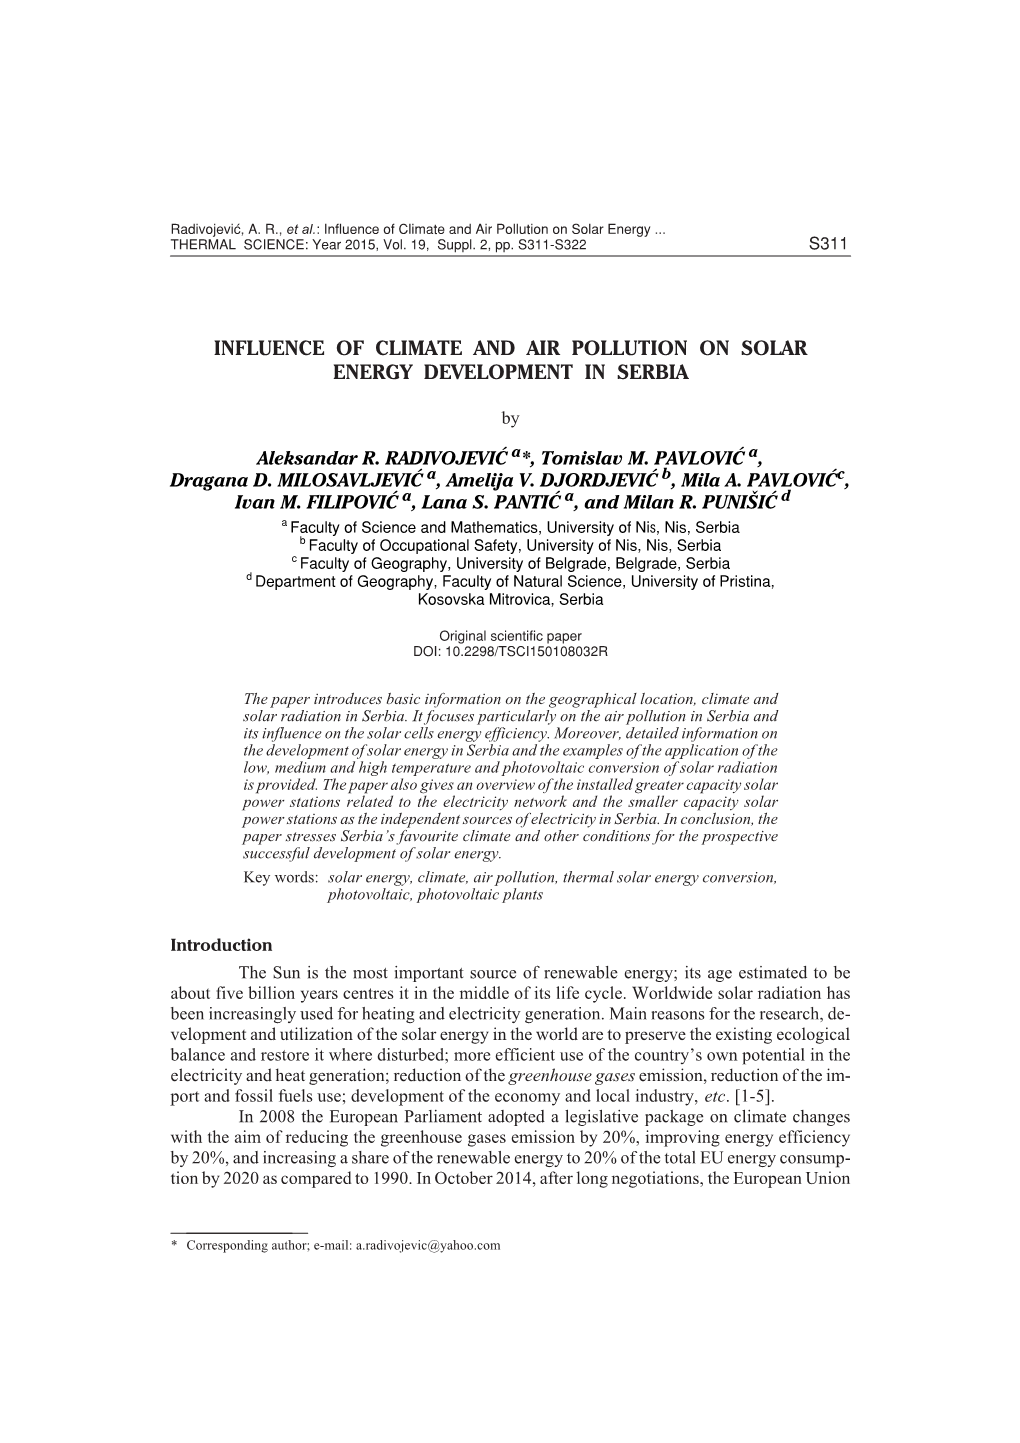 Influence of Climate and Air Pollution on Solar Energy Development in Serbia